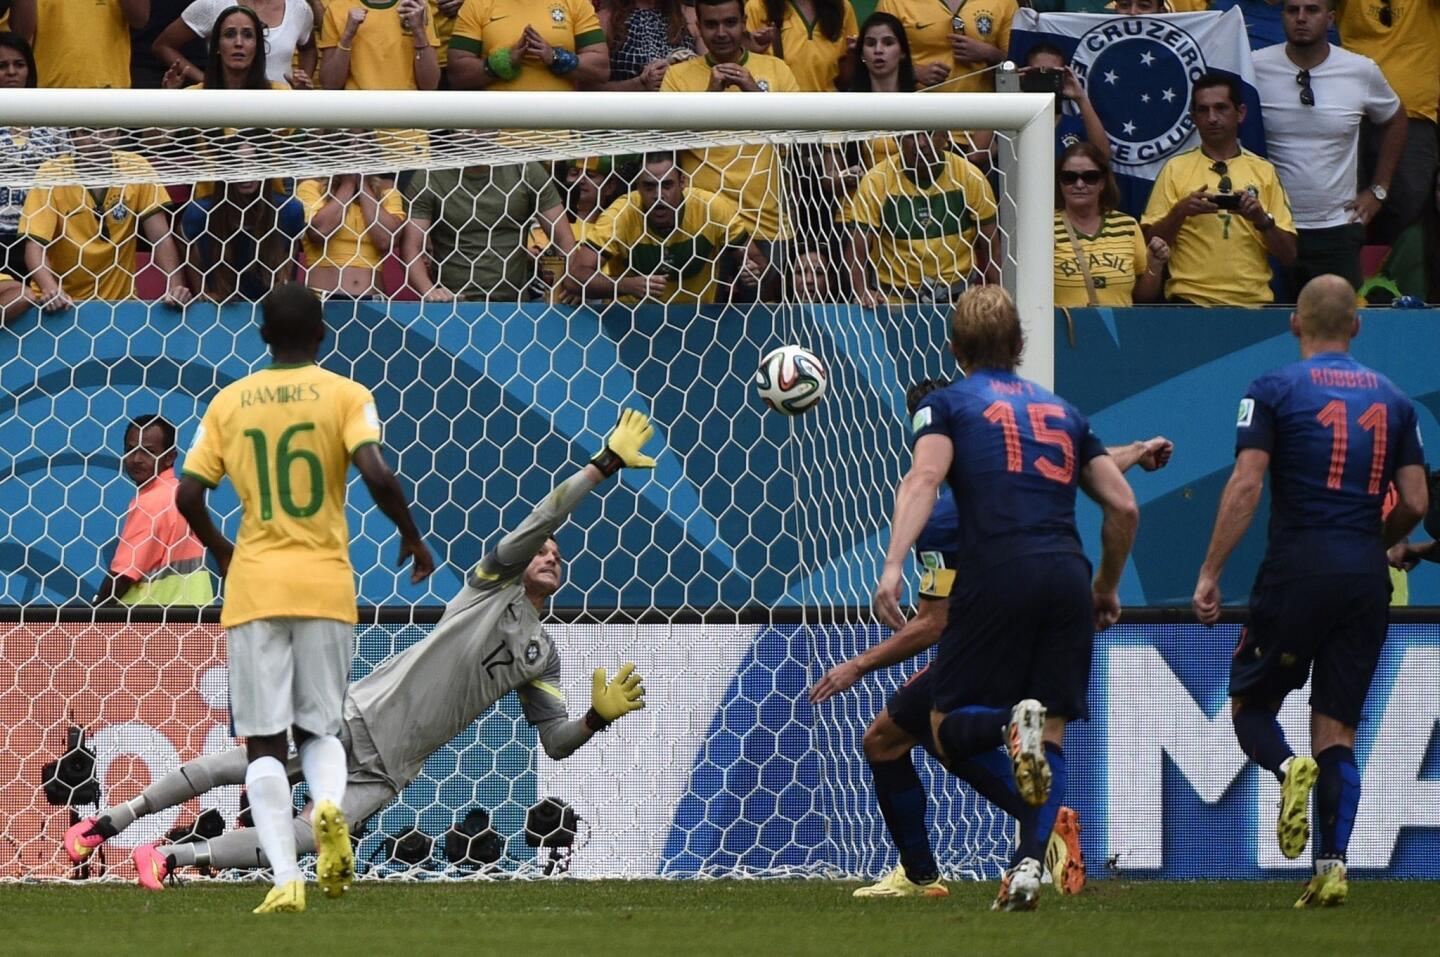 Brazil goalkeeper Julio Cesar can't stop a penalty kick by the Netherlands' Robin van Persie from finding the back of the net during the Netherlands' 3-0 win in the third-place match of the 2014 World Cup.